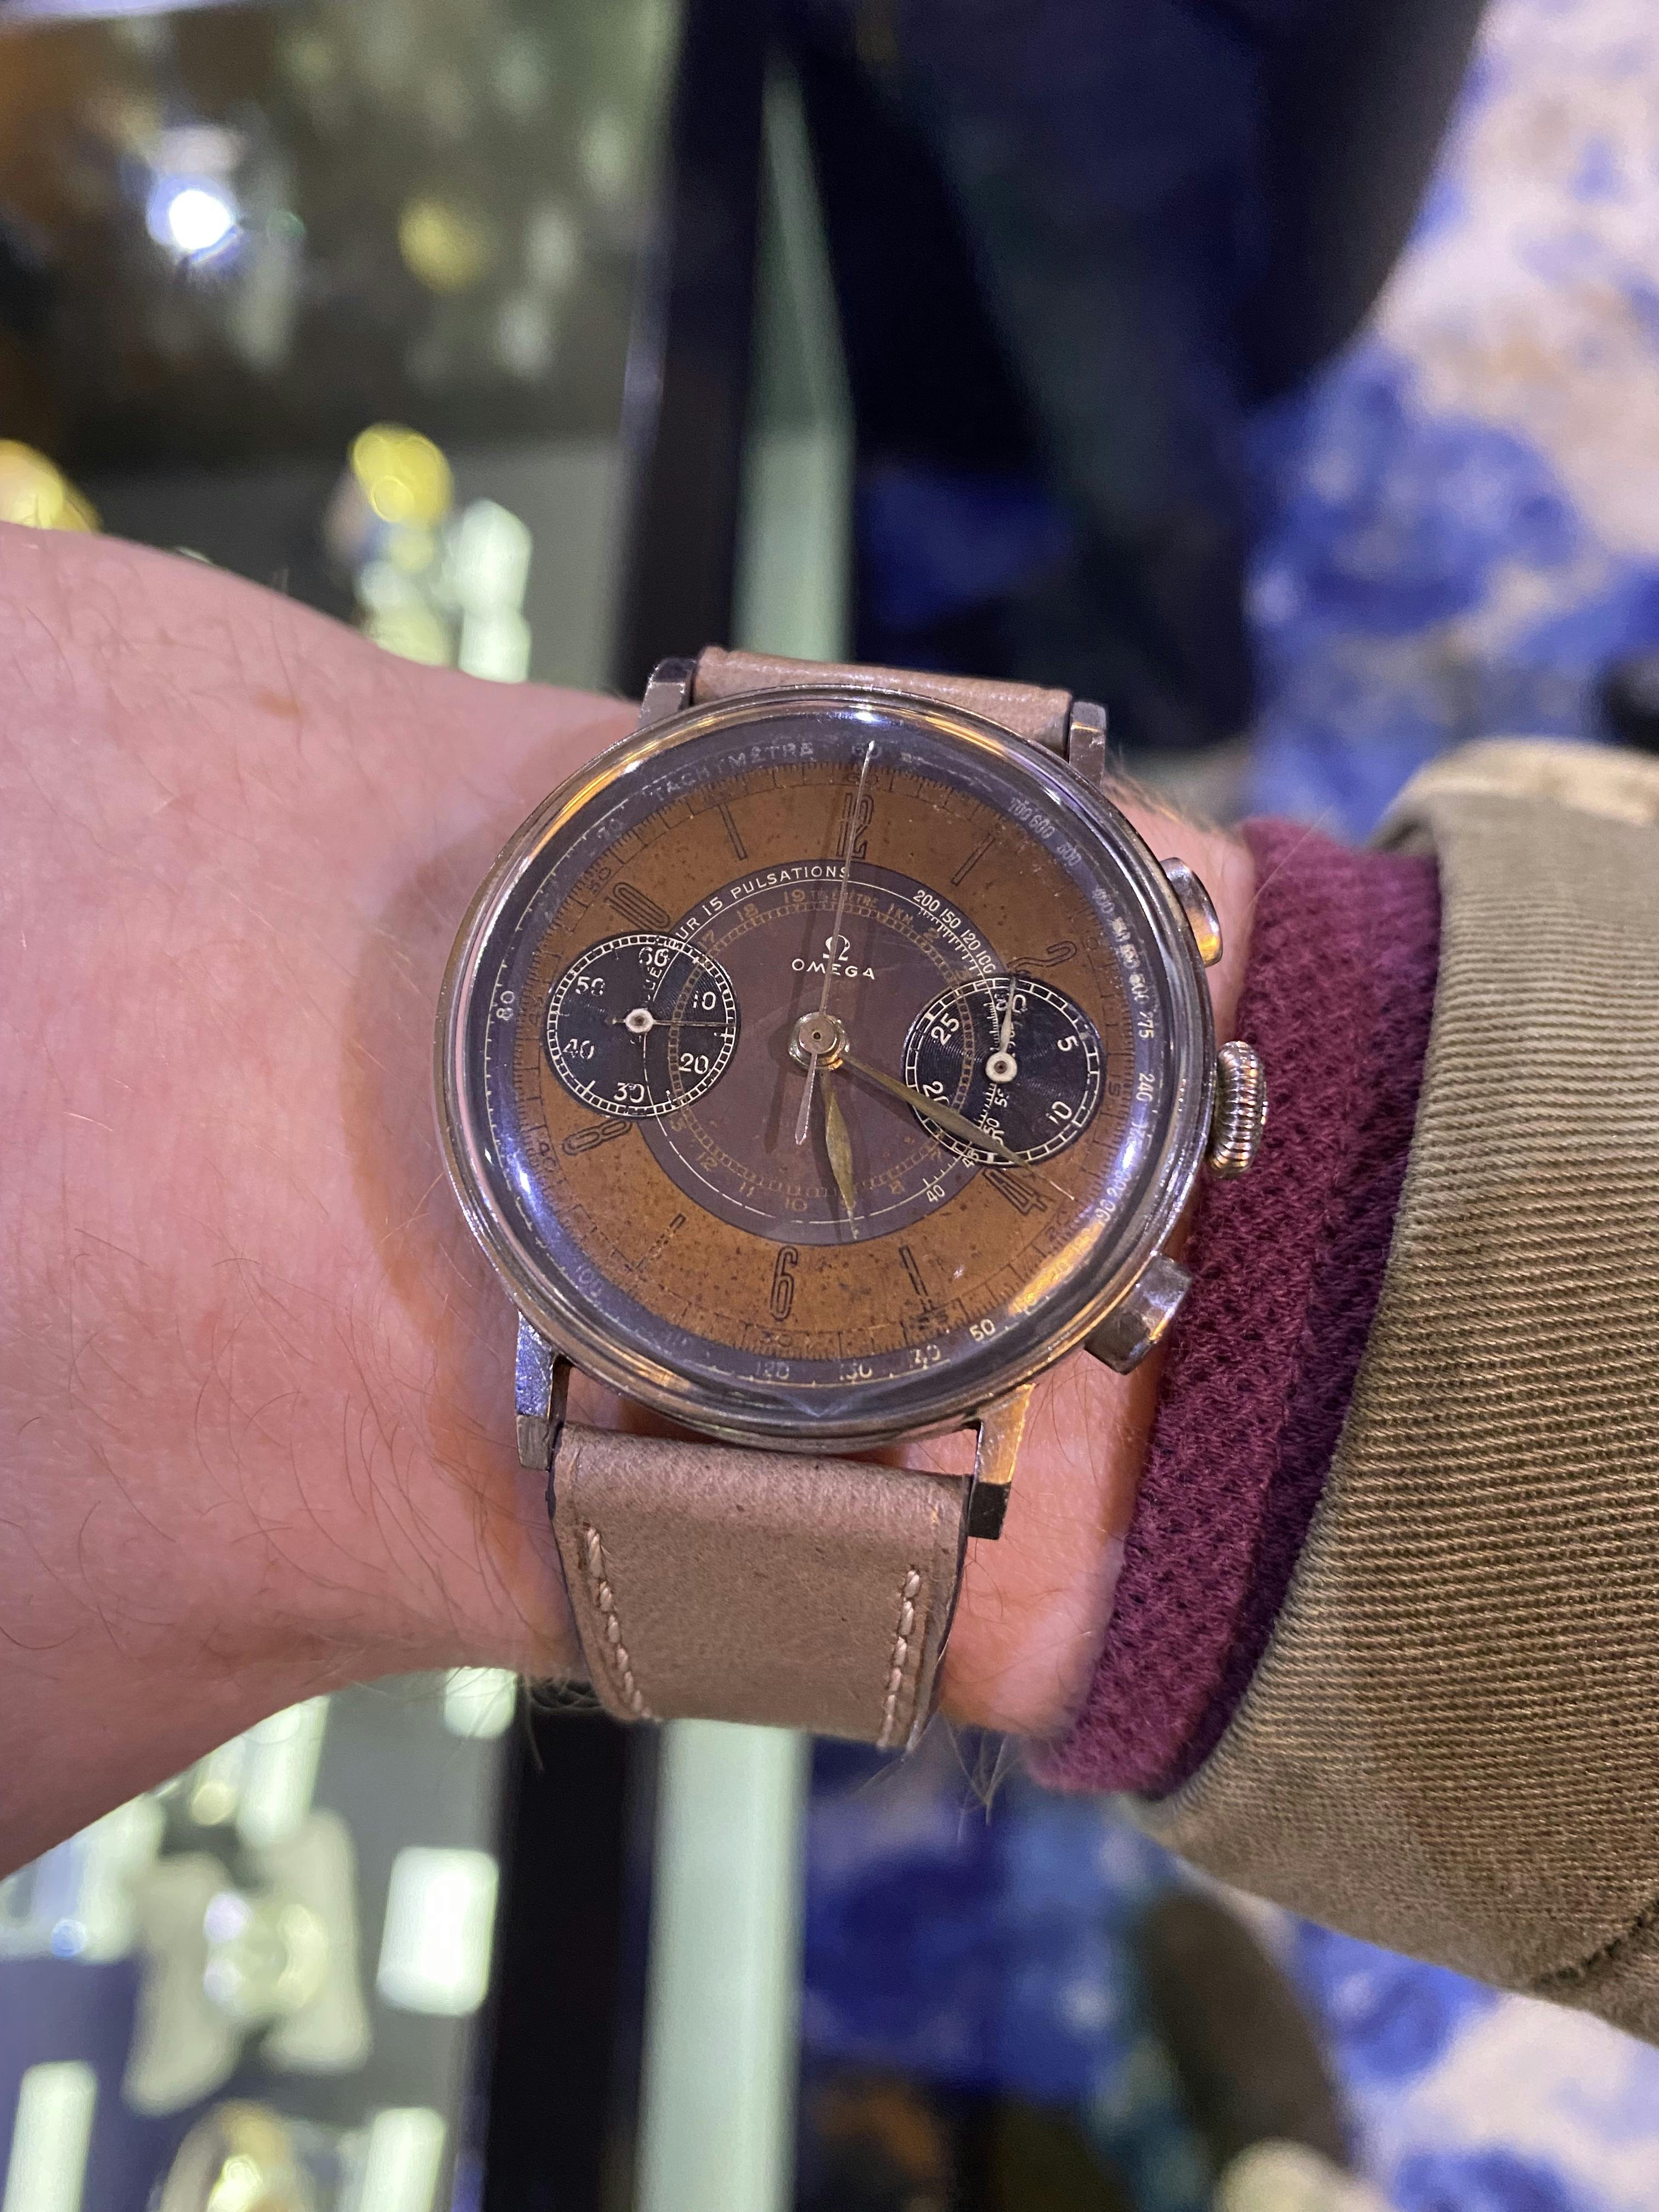 If we hadn't asked Daniel over at Somlo about this watch he's selling, we wouldn't have known that it has a brass face and in incredibly rare